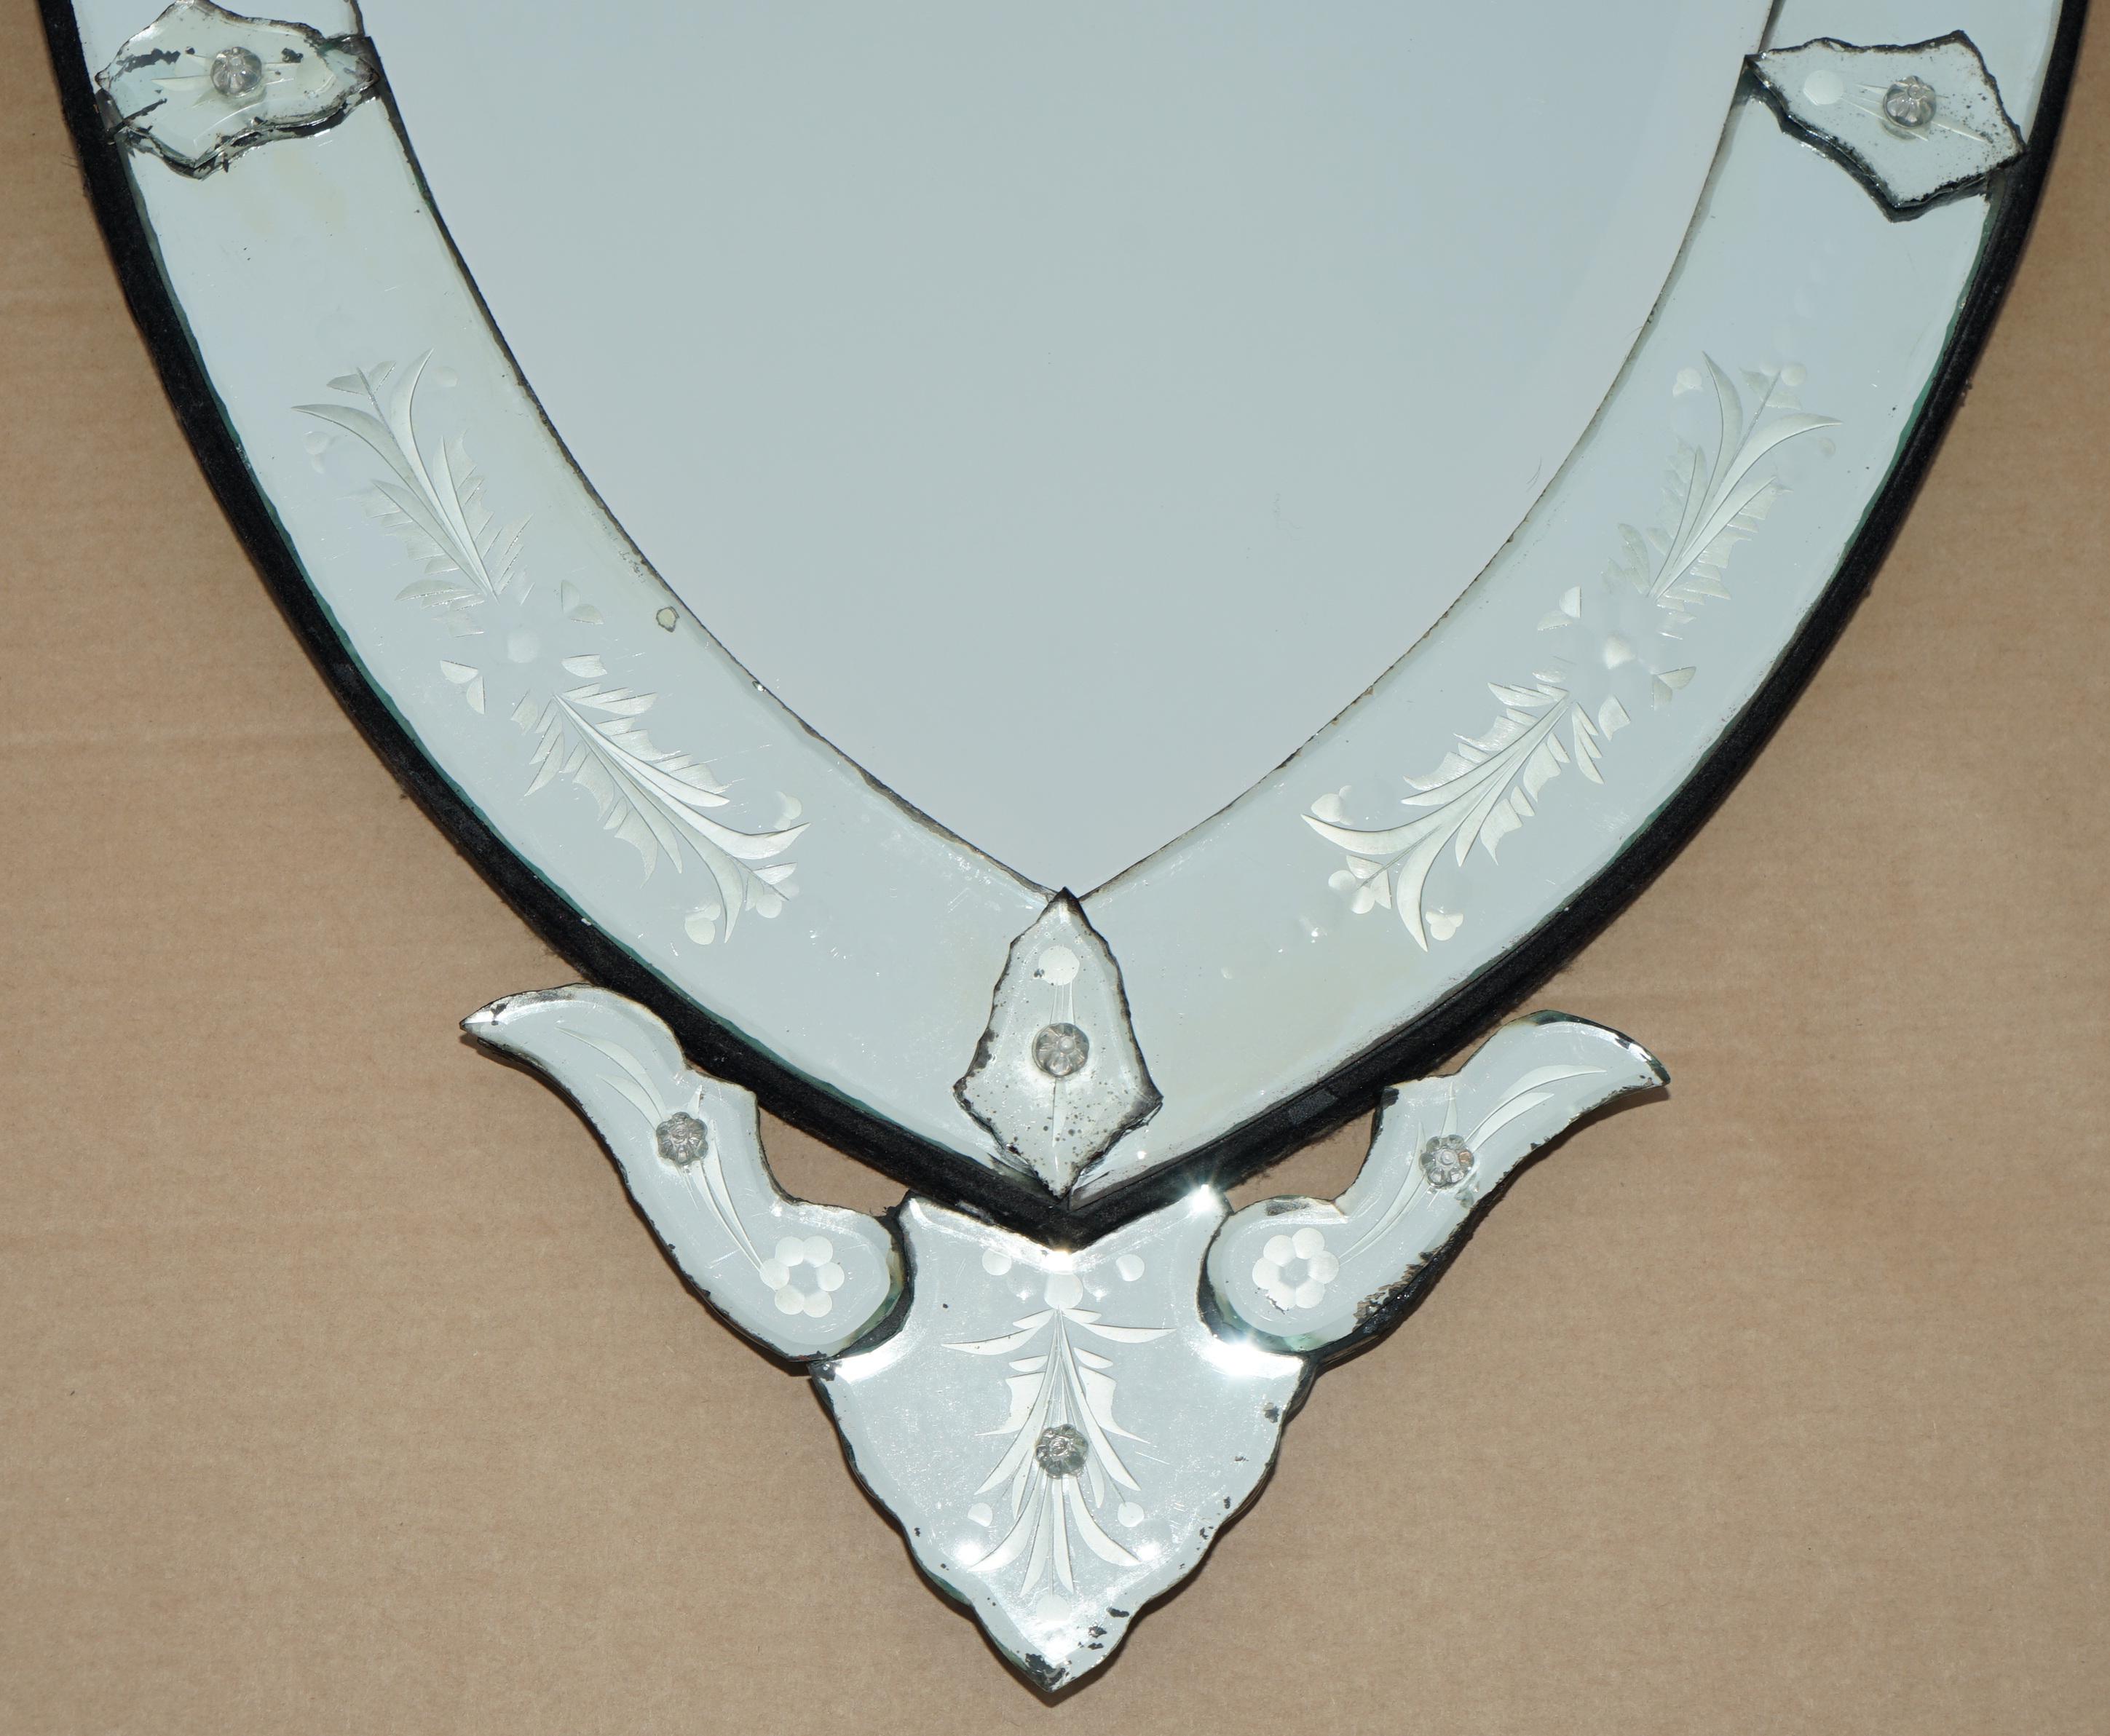 Royal House Antiques

Royal House Antiques is delighted to offer for sale this stunning original circa 1910’s Venetian etched mirror with bevelled edge frame in the shape of a heart which was hand made in Italy 

Please note the delivery fee listed